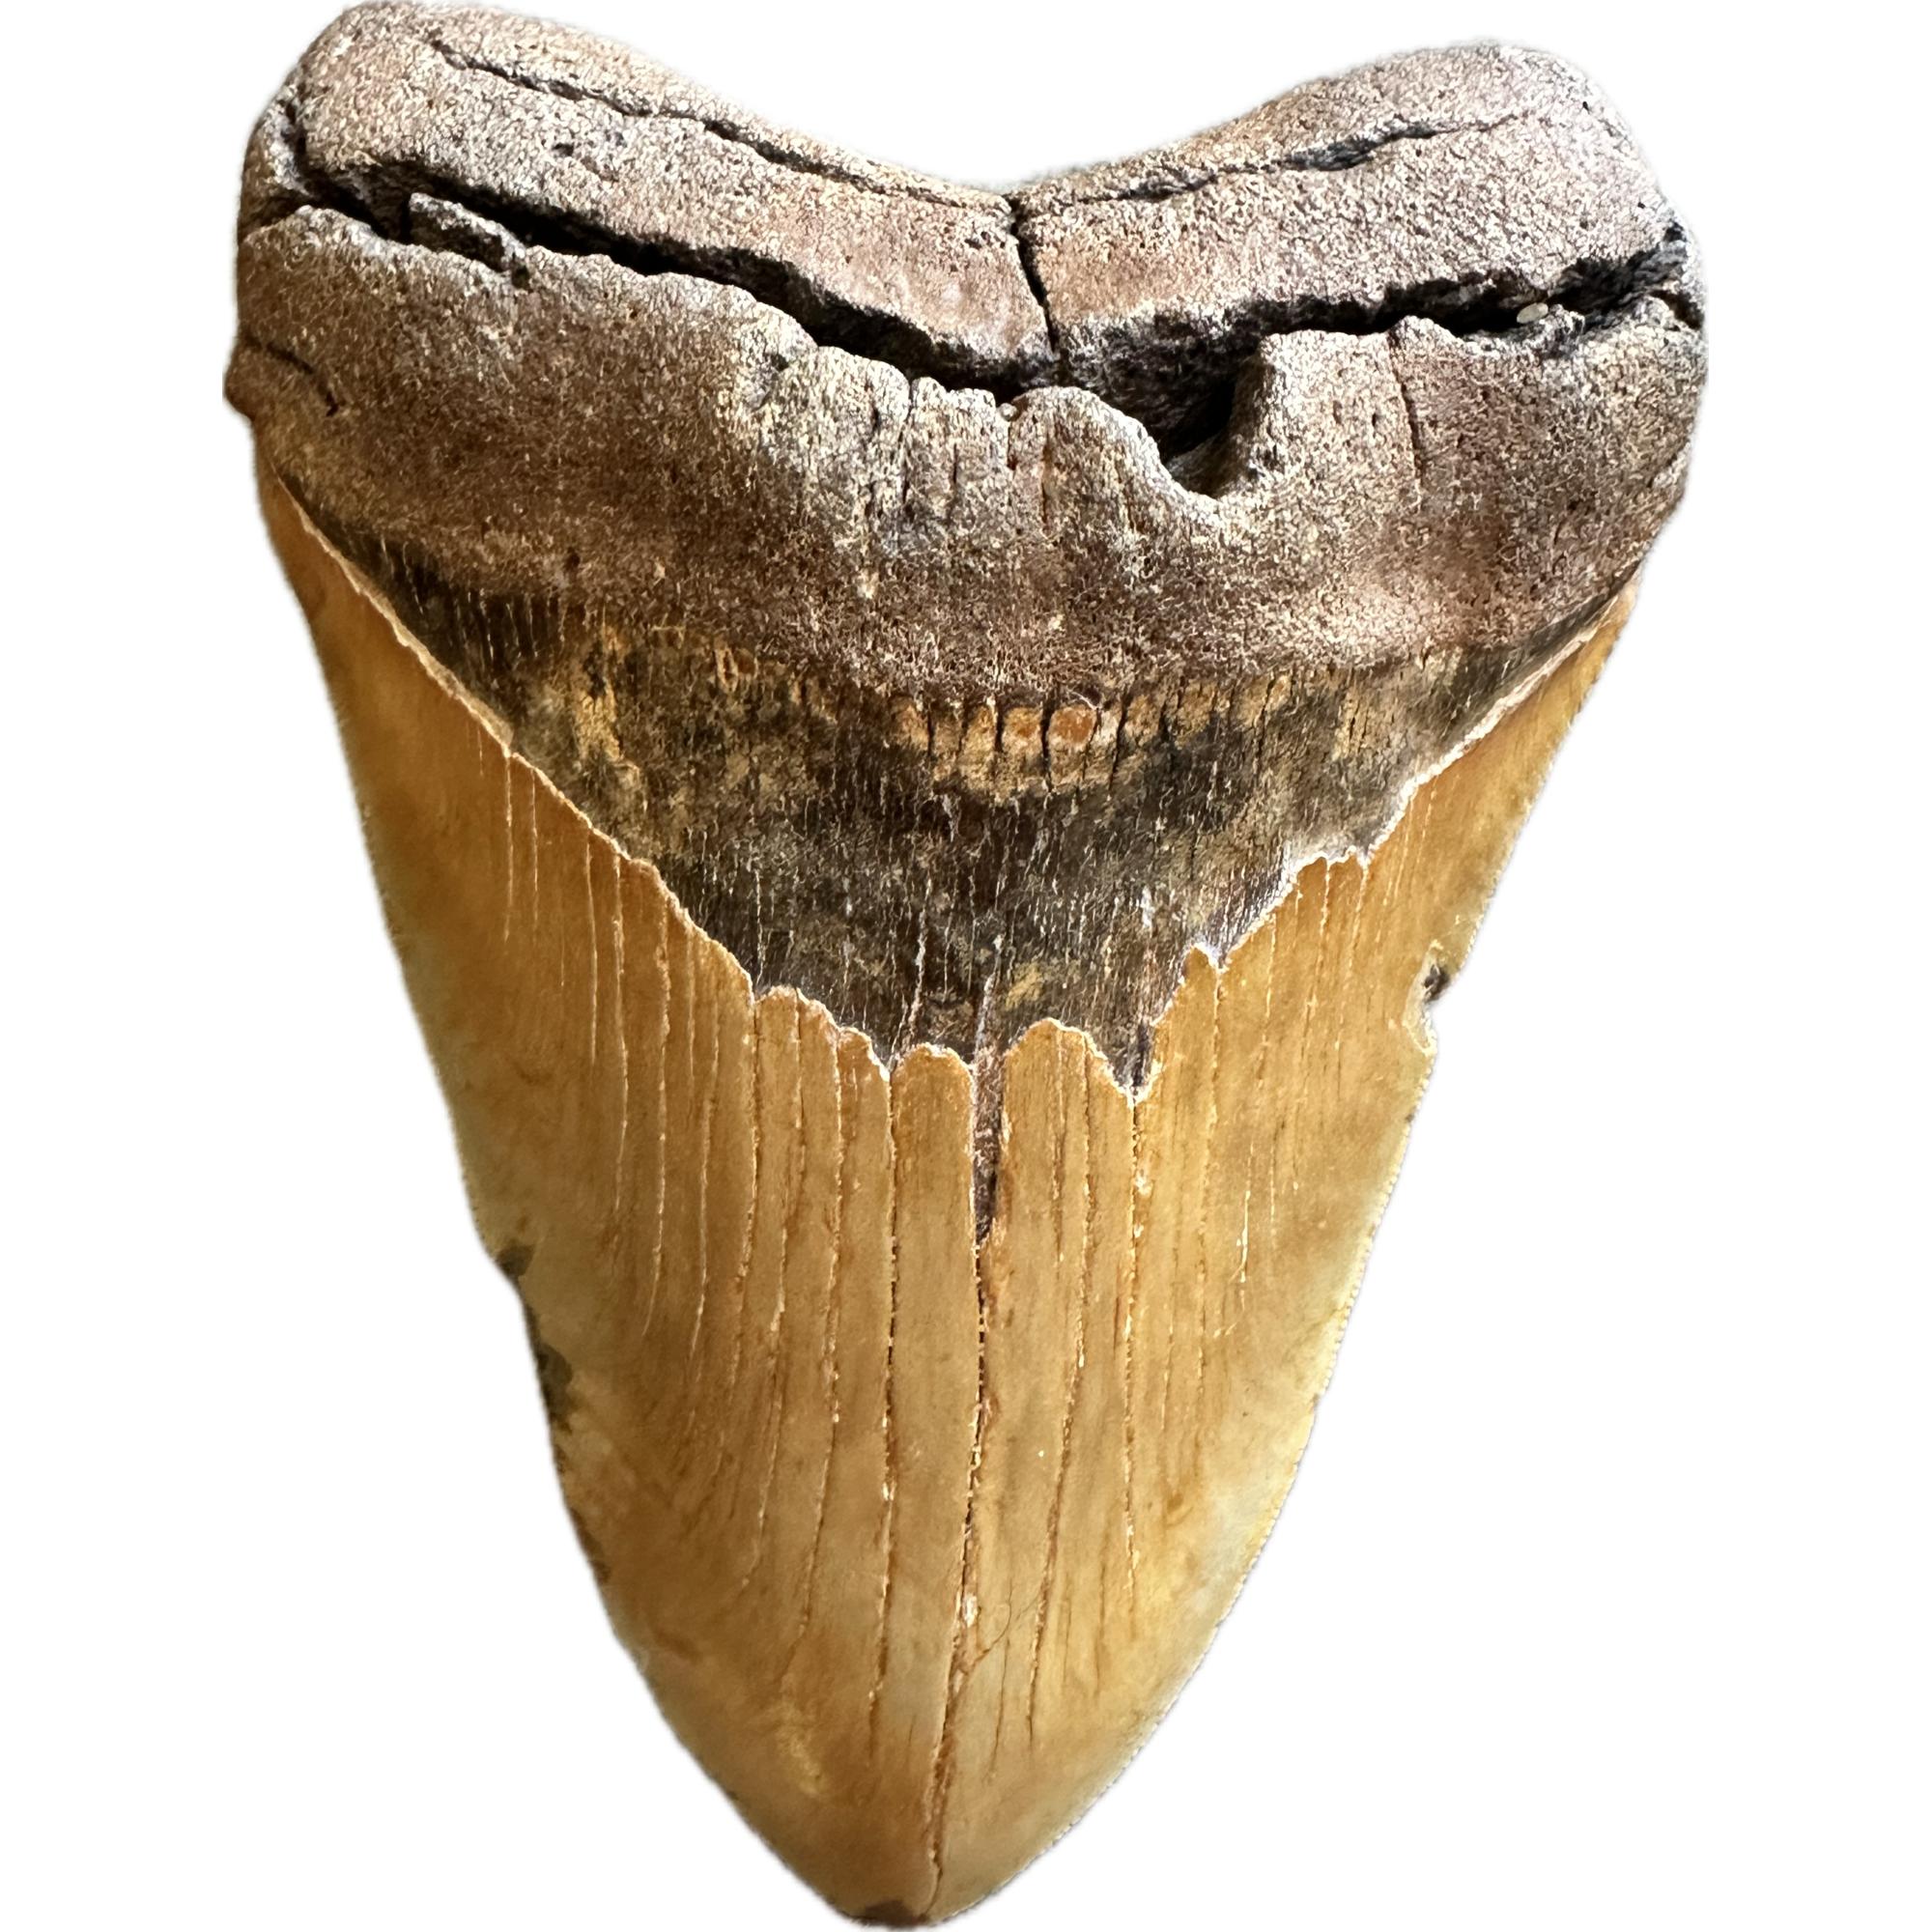 This huge 6.01” gold colored Megalodon tooth has exceptional enamel, great serrations and overall great look front and back!